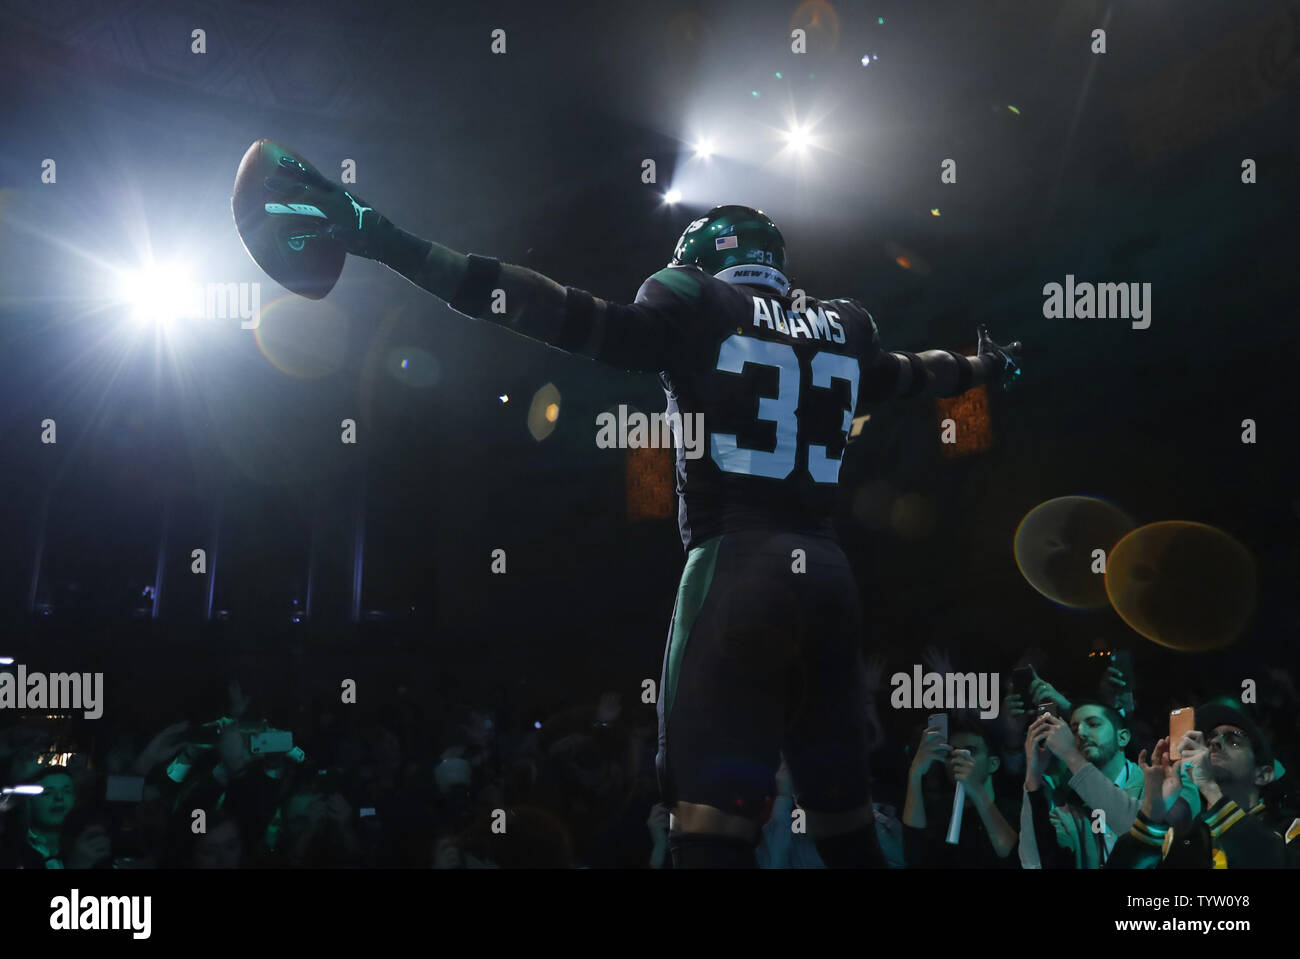 New York Jets Safety Jamal Adams (33) models the new Jets NFL football  uniforms when the New York Jets host a Uniform Launch Event at Gotham Hall  in New York City on